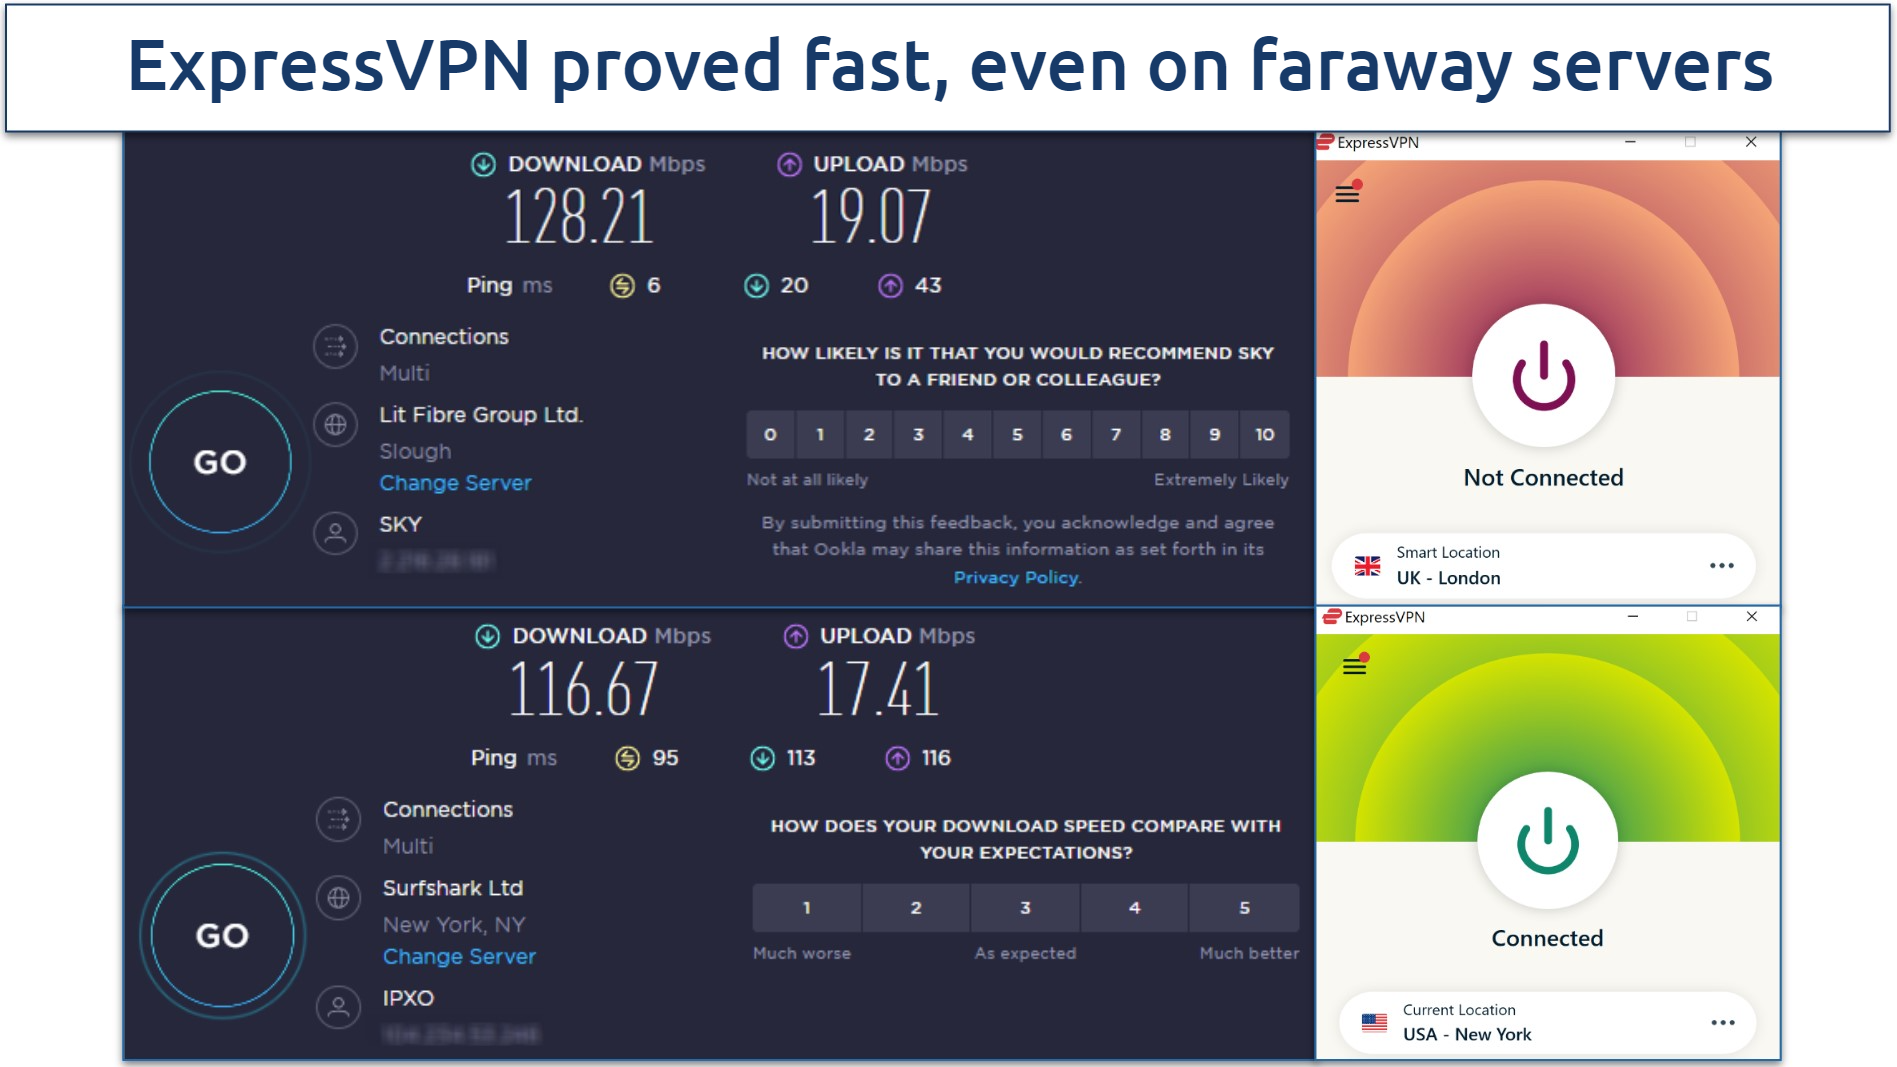 Screenshot of speed tests run using our base connection and ExpressVPN's New York server